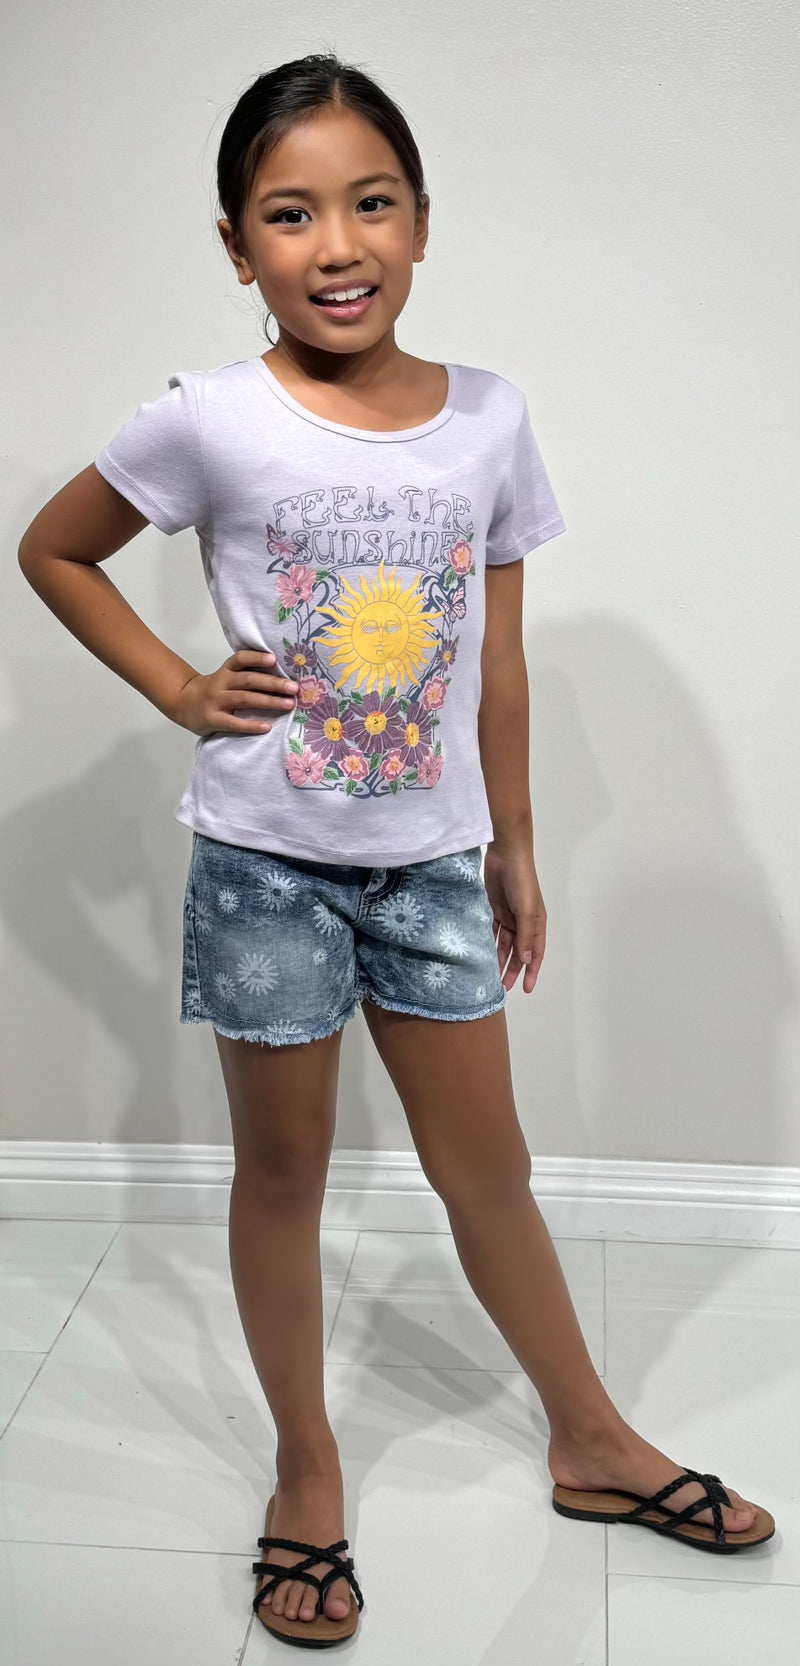 Jeans Warehouse Hawaii - S/S PRINT 7-16 - FEEL THE SUNSHINE TOP | KIDS SIZE 7-16 | By IKEDDI IMPORTS